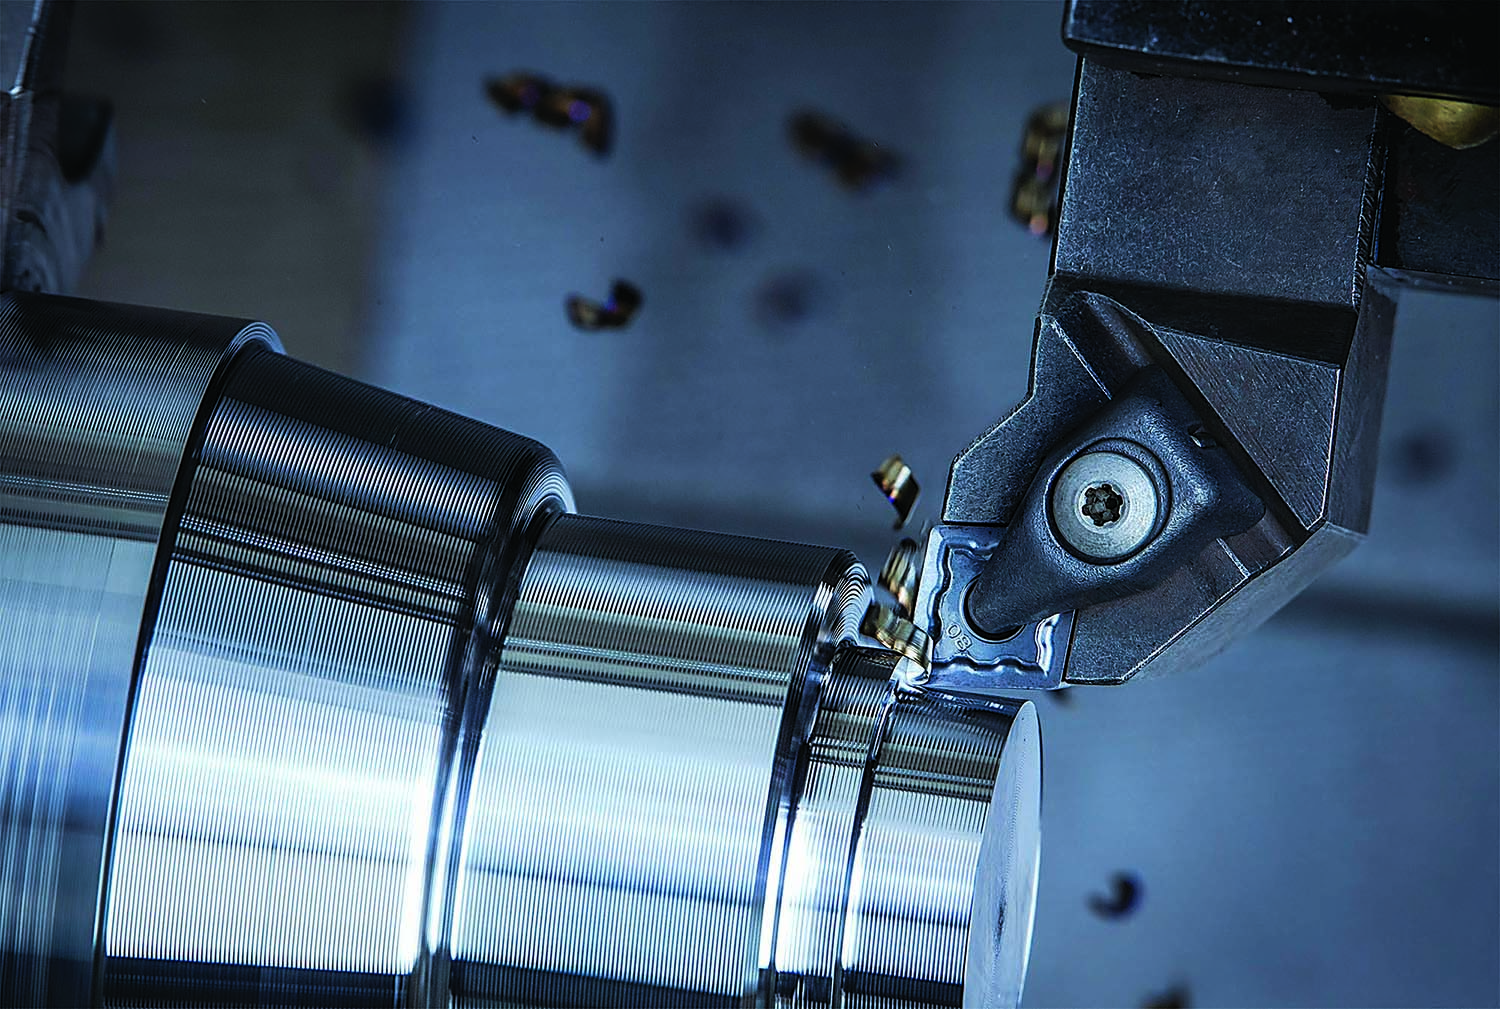 As workpiece materials and machining operations have become more complex, so have the tools and coatings to boost  metalcutting productivity for manufacturers.